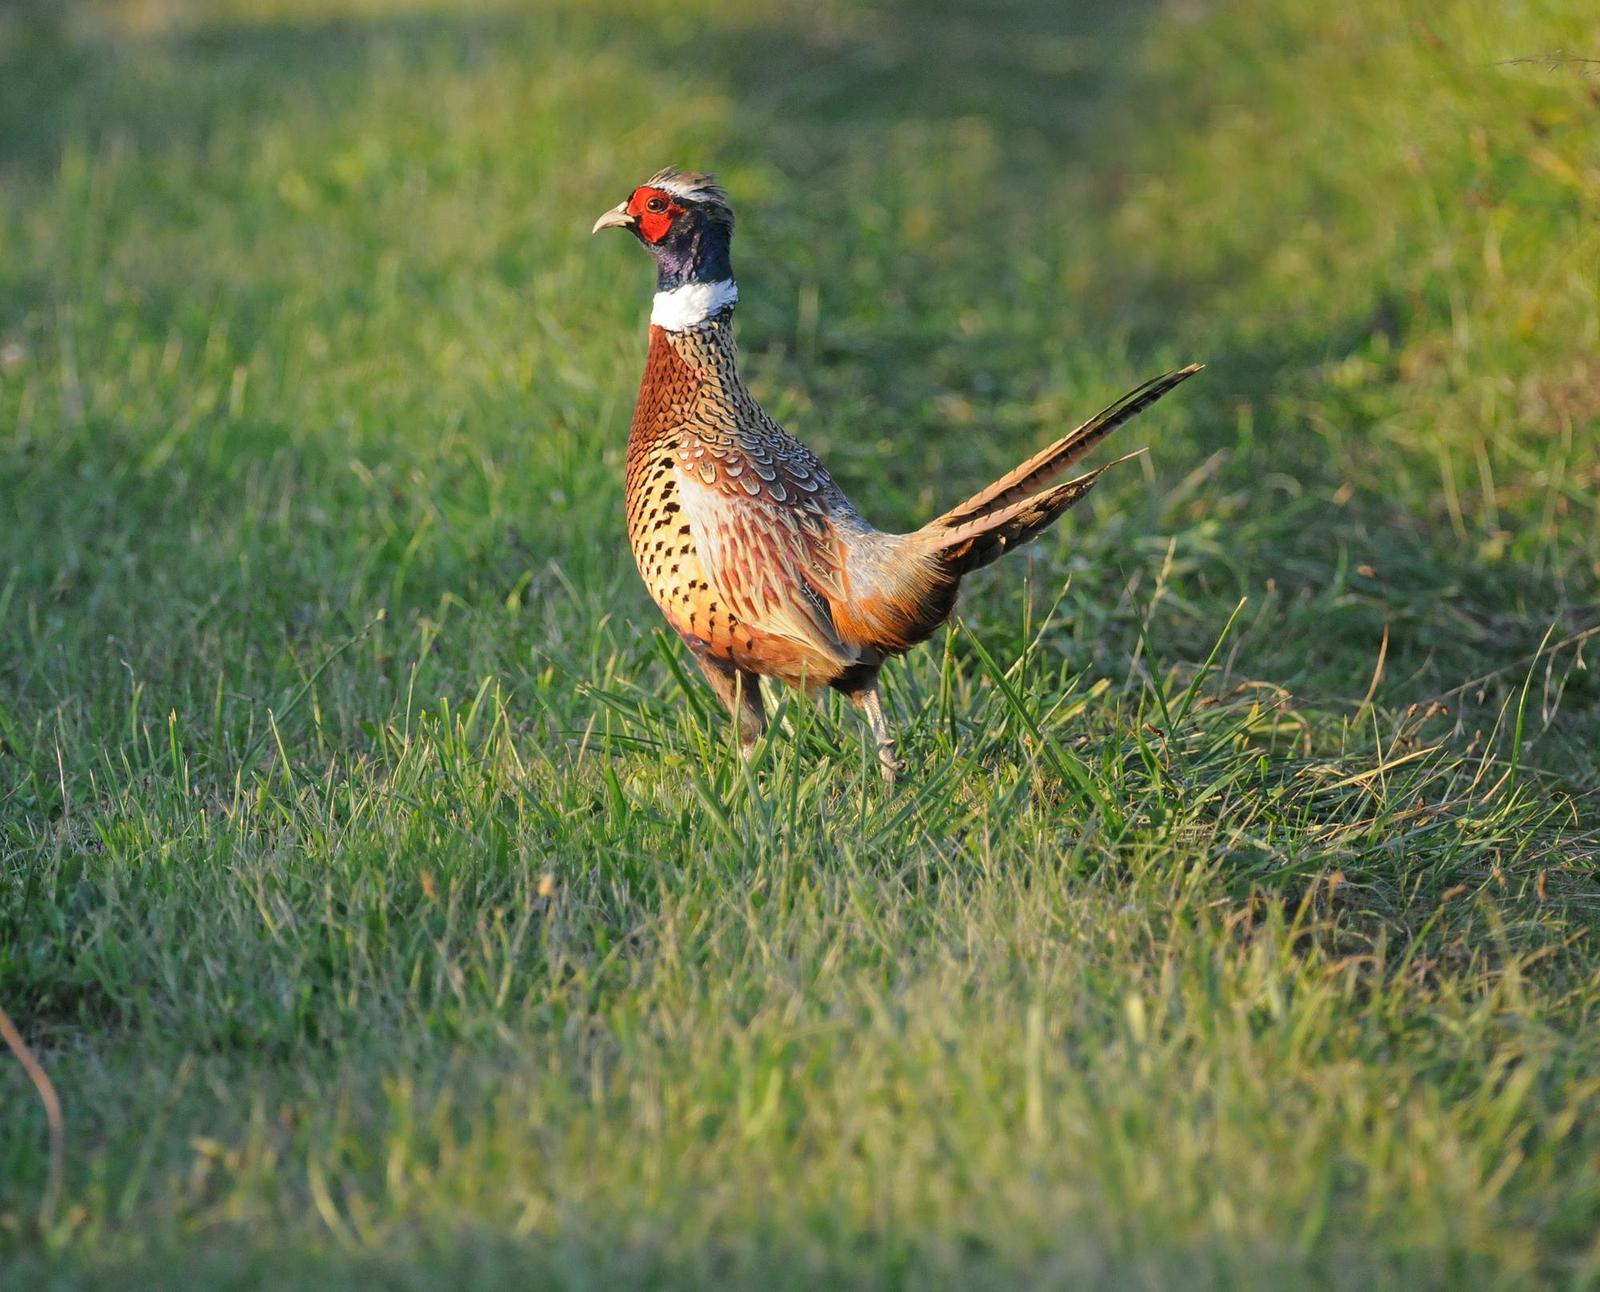 Ring-necked Pheasant (Ring-necked) Photo by Steven Mlodinow